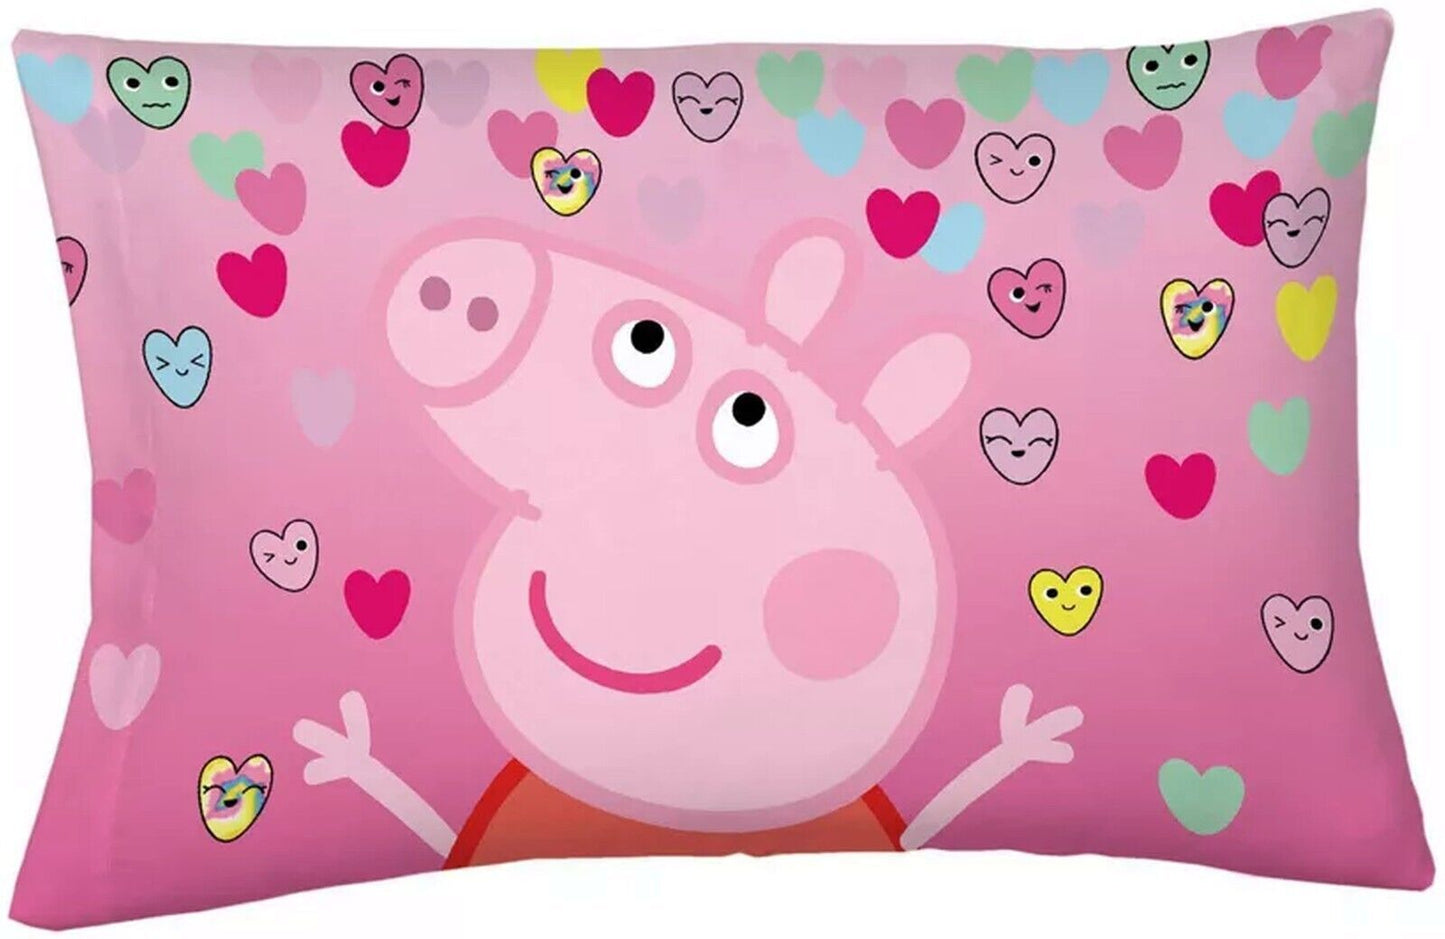 Peppa Pig Pillowcase measures 20 x 30 inches